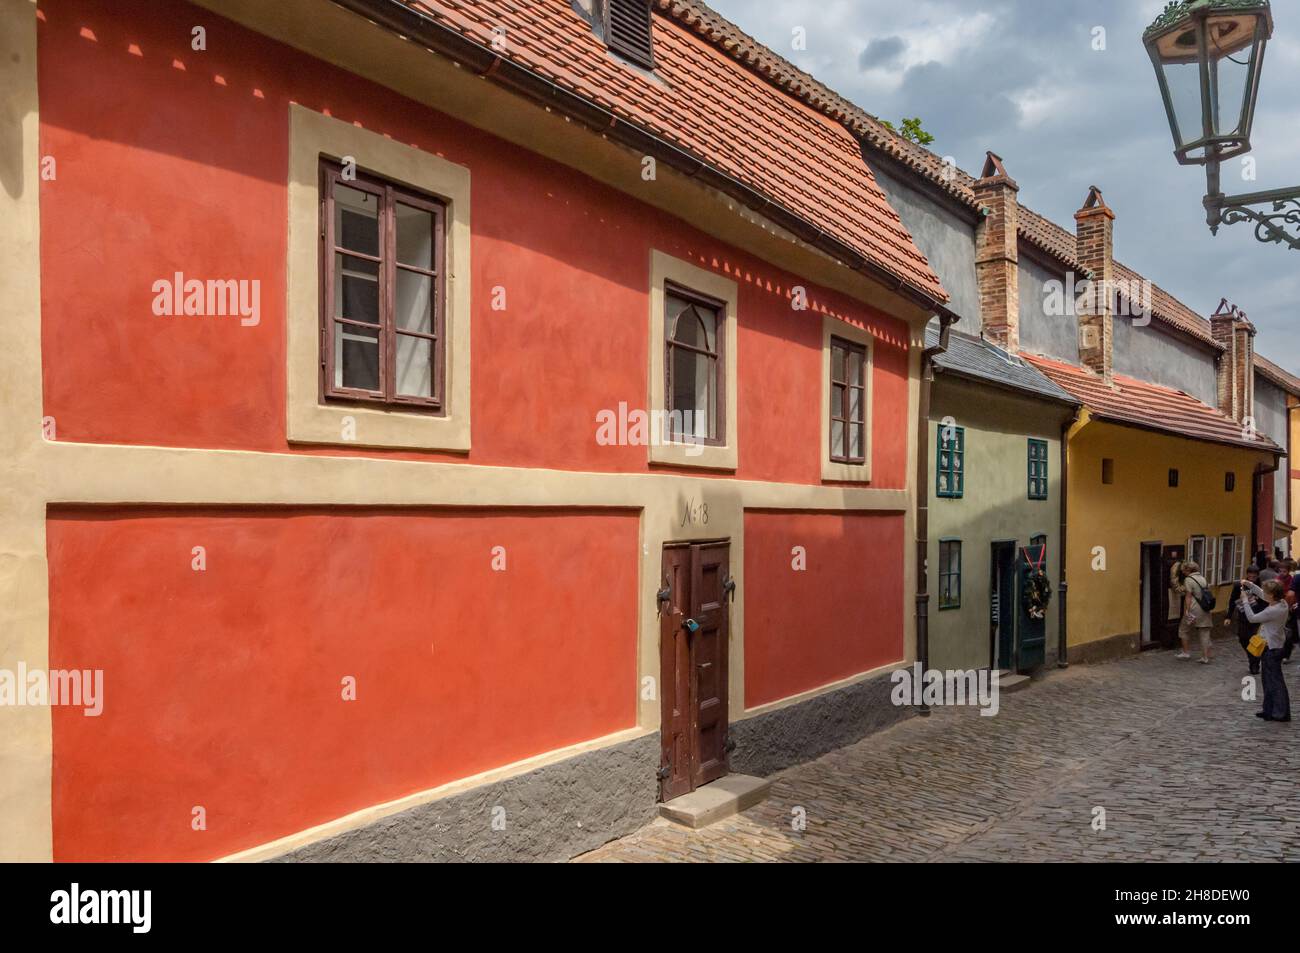 https://c8.alamy.com/comp/2H8DEW0/built-into-the-late-gothic-fortifications-at-the-castles-northern-side-colourful-little-houses-line-the-medieval-golden-lane-in-prague-castle-2H8DEW0.jpg